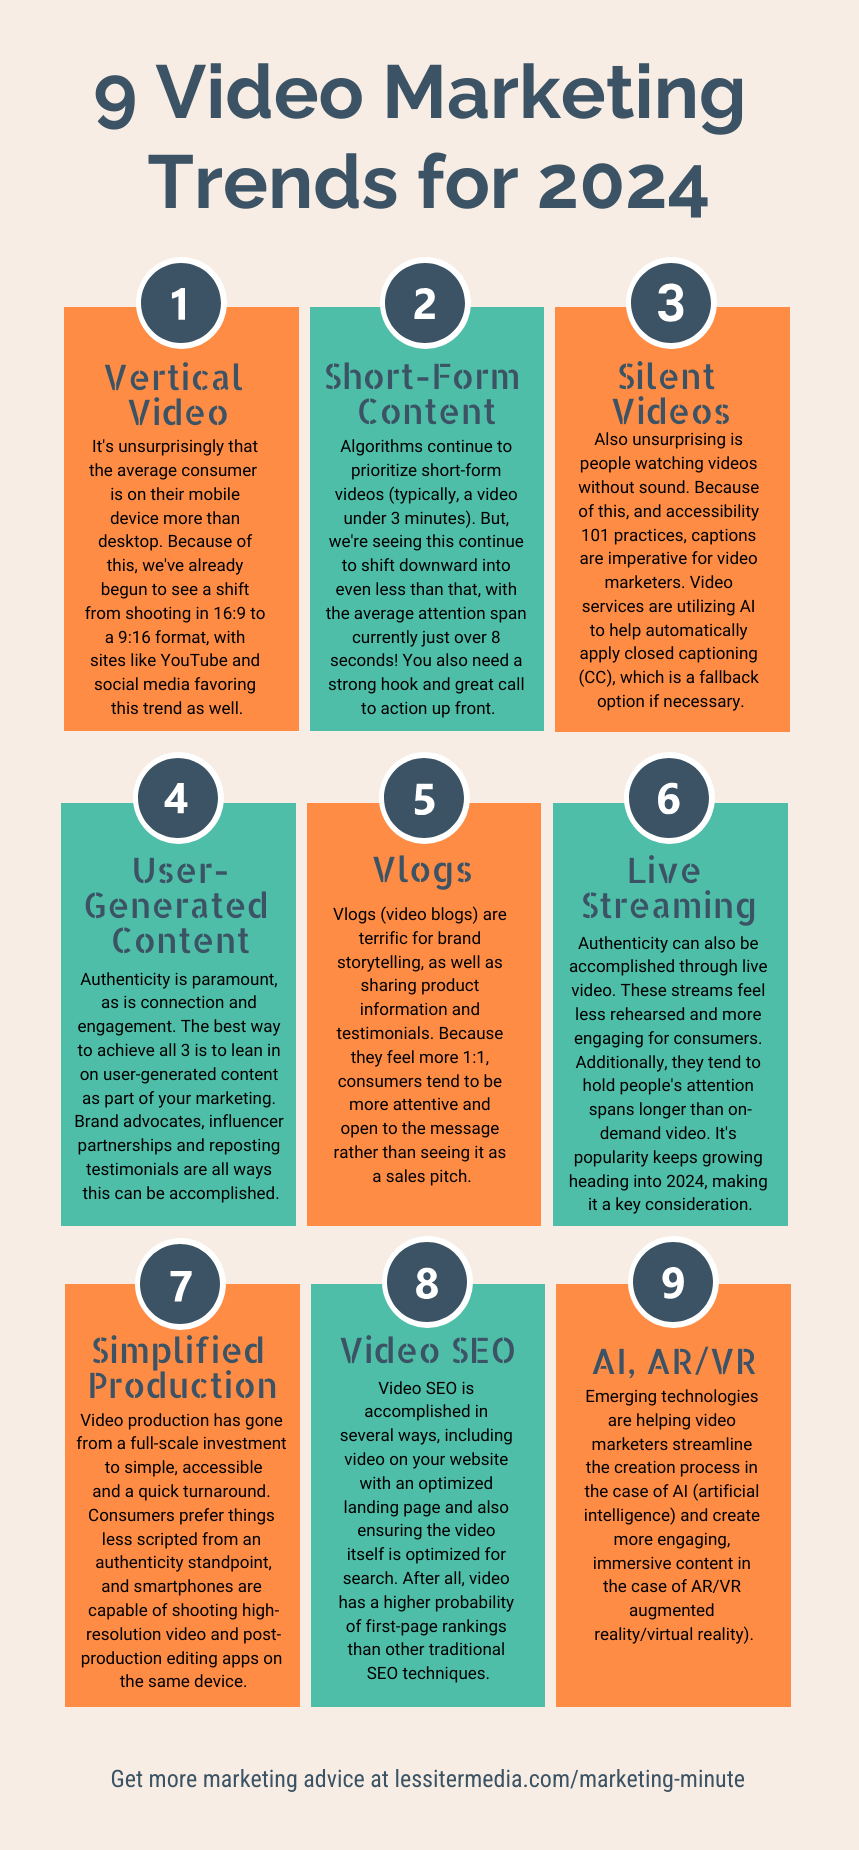 9 Video Marketing Trends for 2024